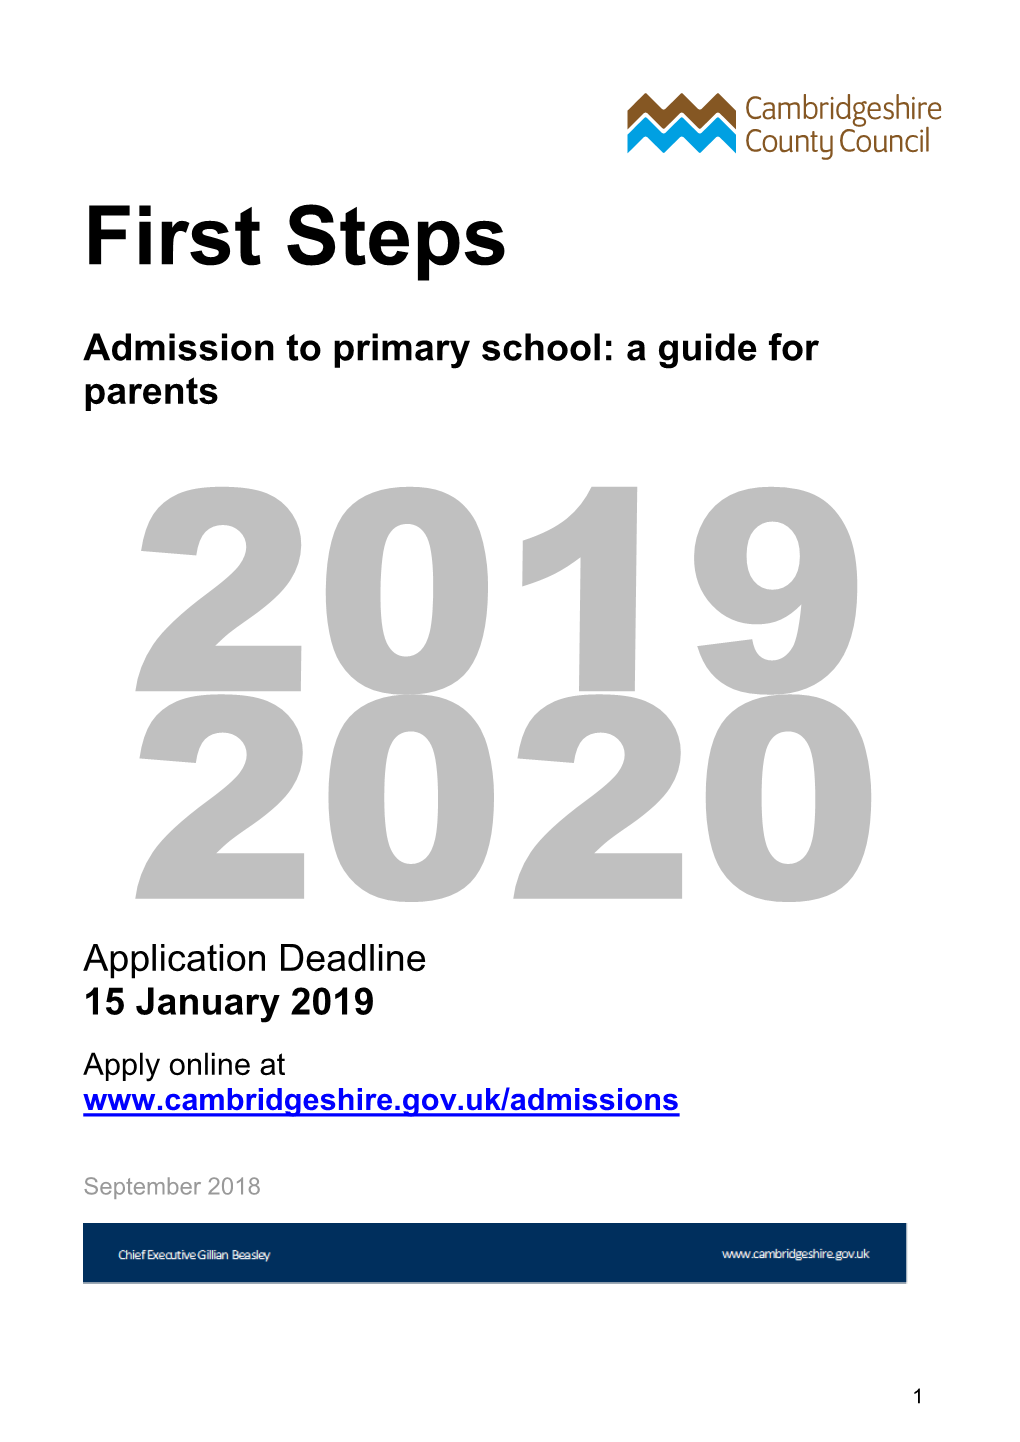 FIRST STEPS: Admission to Primary School: a Guide for Parents